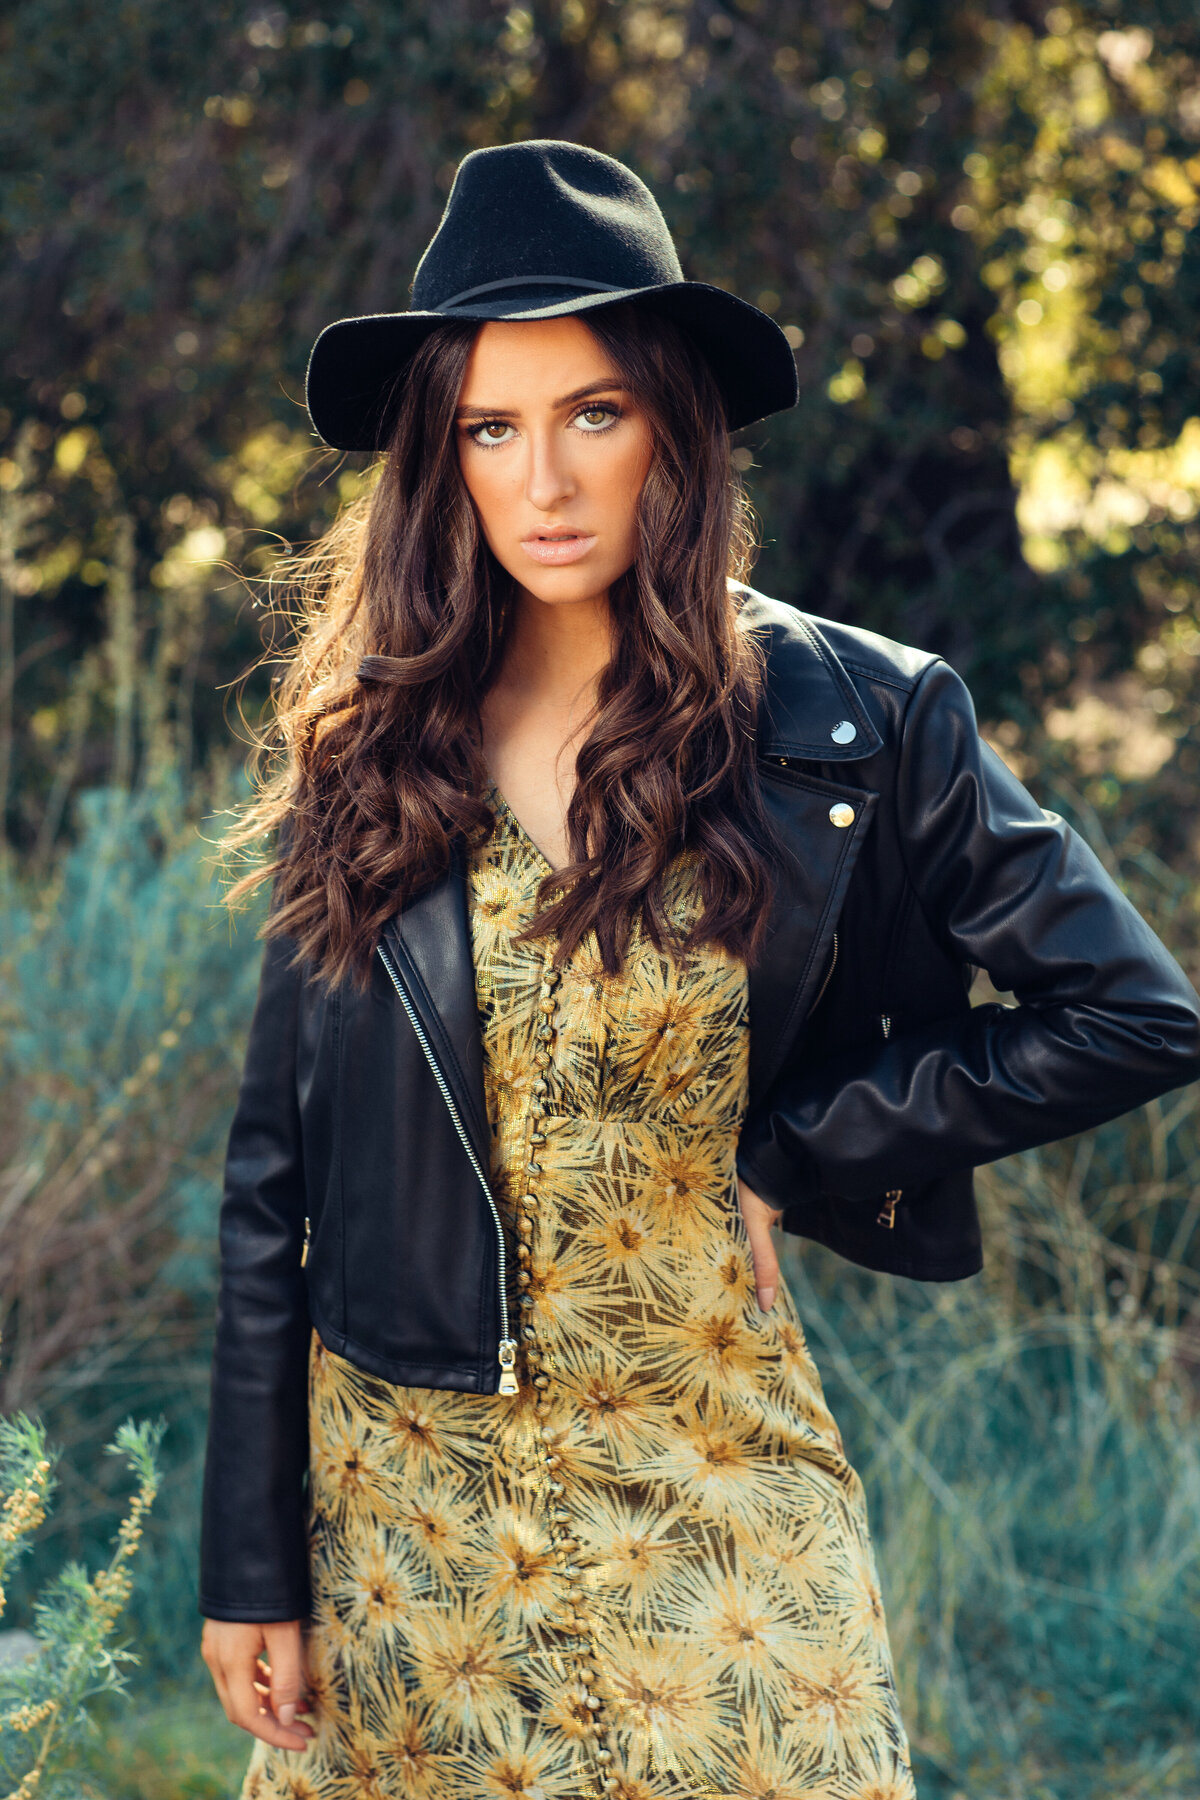 Portrait Photo Of Young Woman Wearing a Cowboy Hat Los Angeles